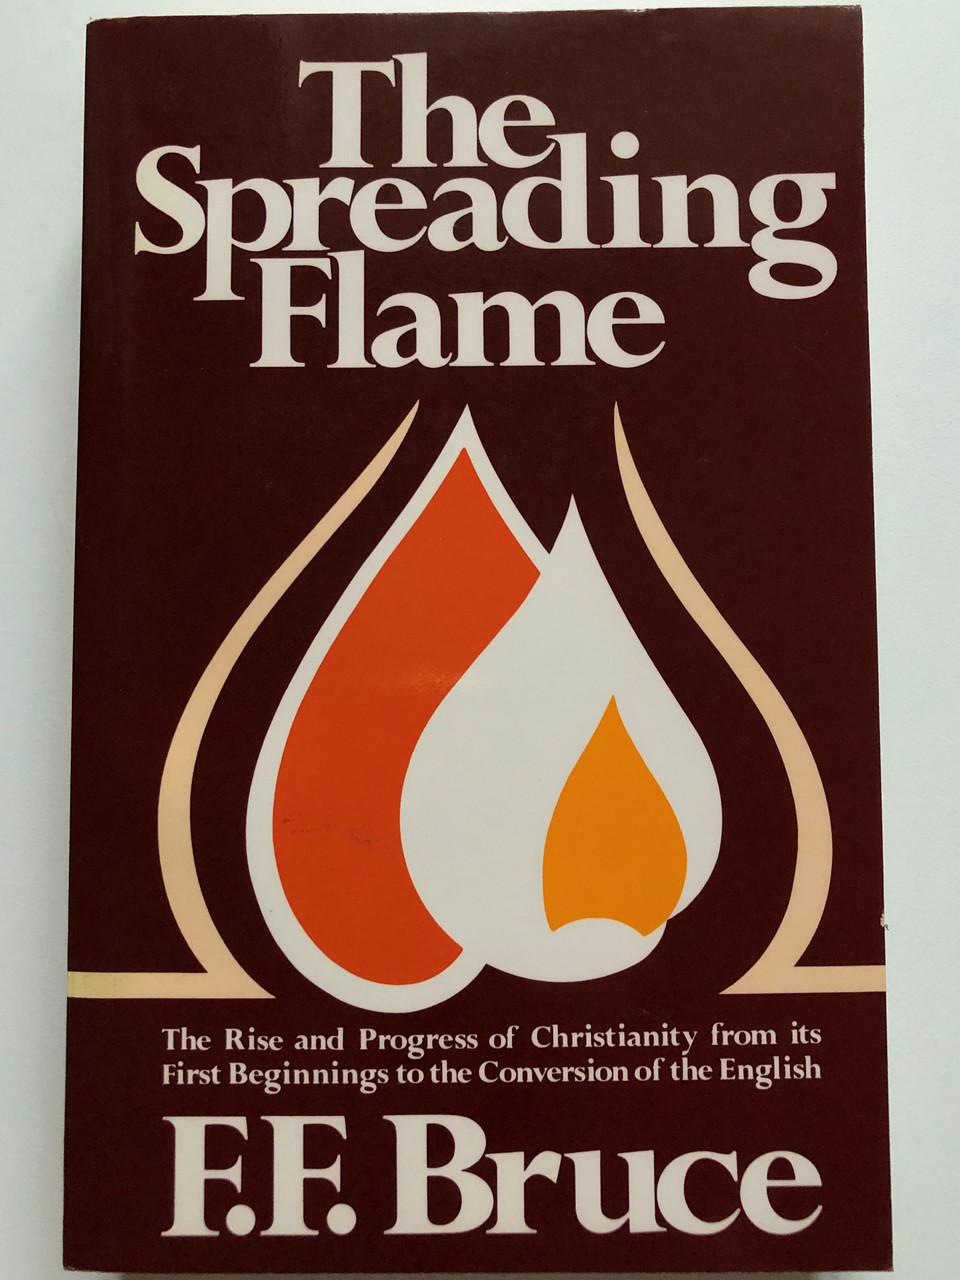 https://cdn10.bigcommerce.com/s-62bdpkt7pb/products/51772/images/263317/1_The_Spreading_Flame_The_Rise_and_Progress_of_Christianity_from_its_First_Beginnings_to_the_Conversion_of_the_English_9780802818058_1__06539.1673082767.1280.1280.JPG?c=2&_gl=1*icox9f*_ga*MjAyOTE0ODY1OS4xNTkyNDY2ODc5*_ga_WS2VZYPC6G*MTY3MzA2NzgxNS4yNjA0LjEuMTY3MzA4MjY5OS41OS4wLjA.